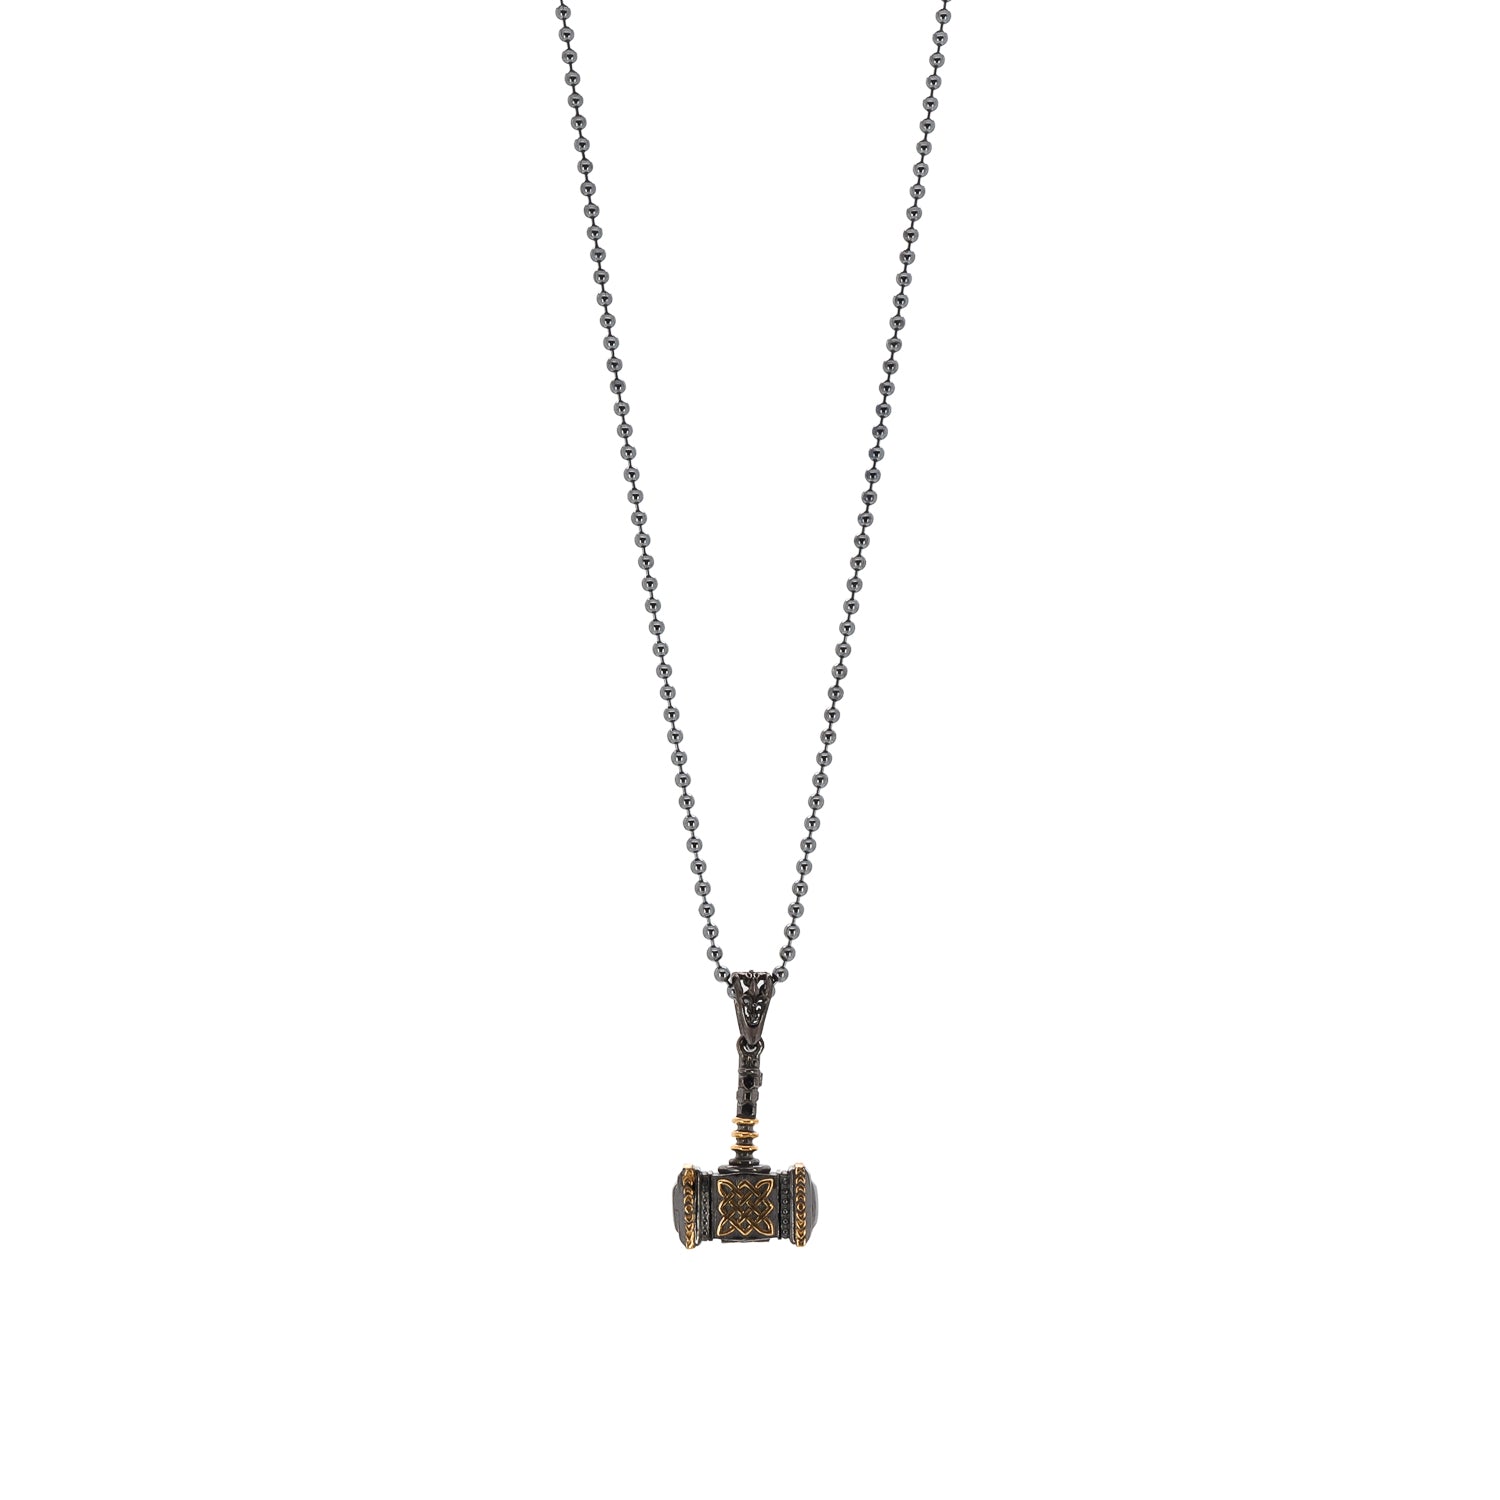 Timeless allure: 24K Gold Plated on 925 Sterling Silver Necklace